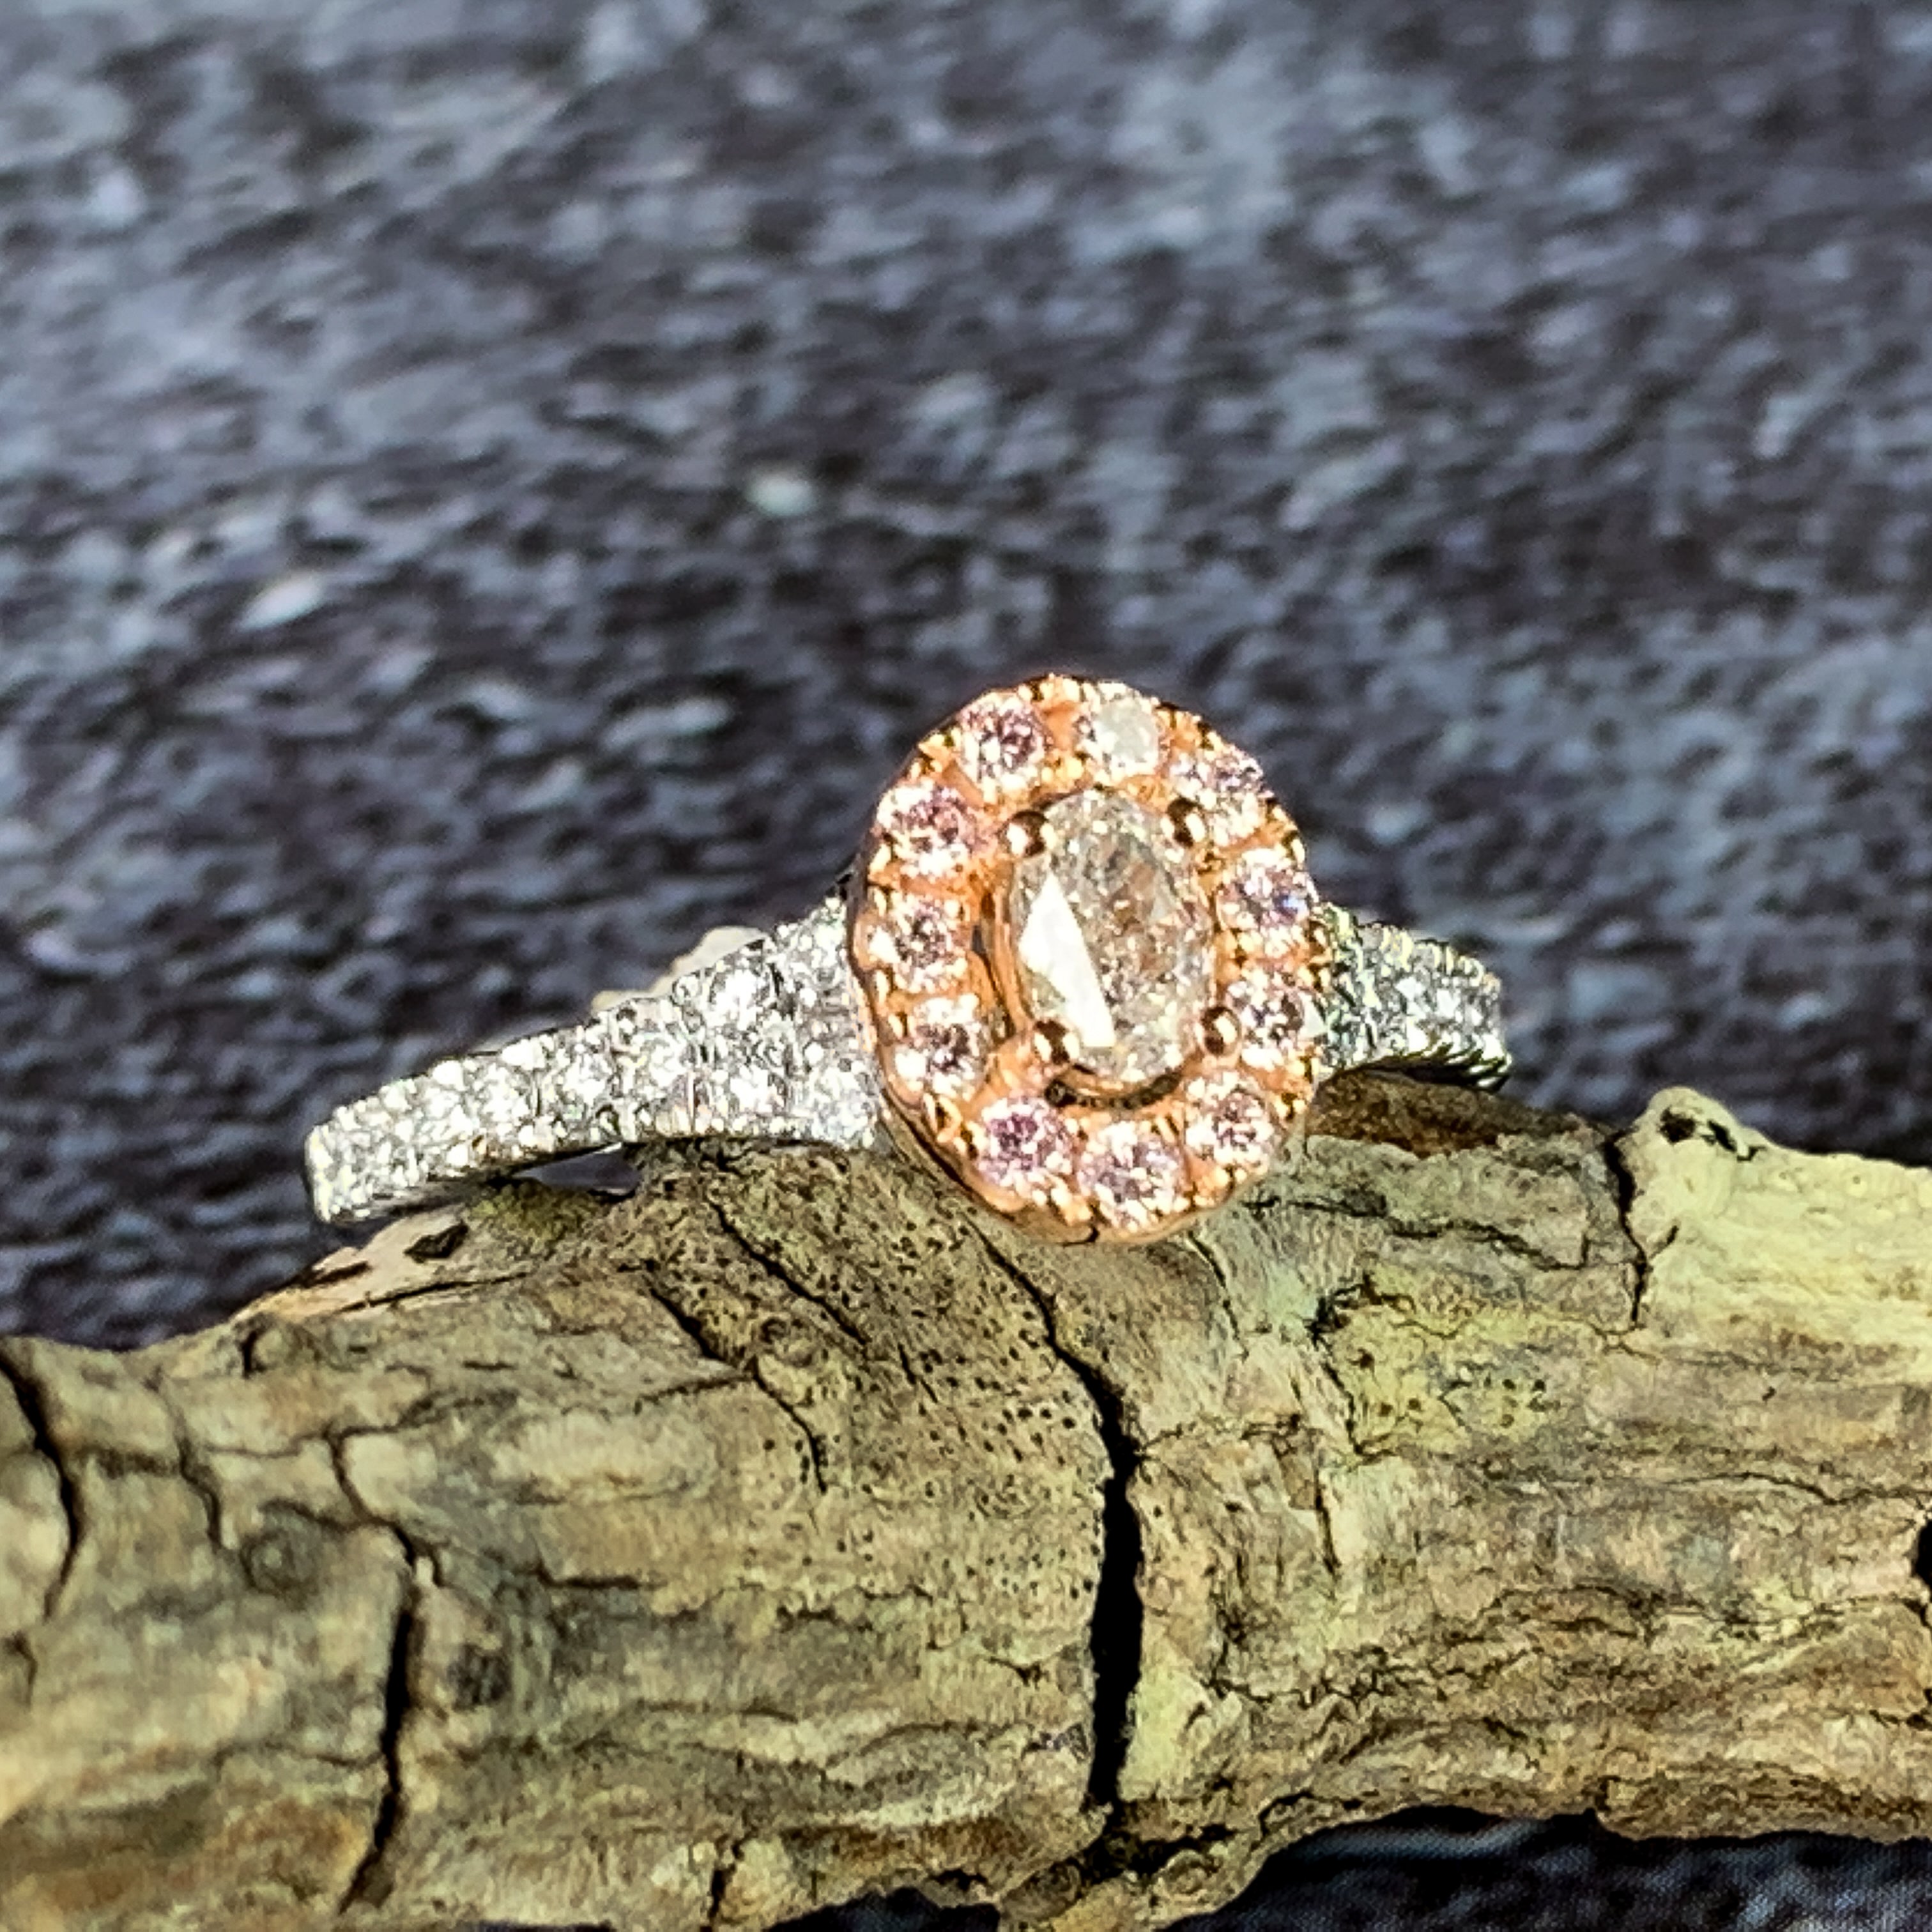 Platinum and 18kt Rose Gold cluster halo design ring with Pink and White Diamonds - Masterpiece Jewellery Opal & Gems Sydney Australia | Online Shop